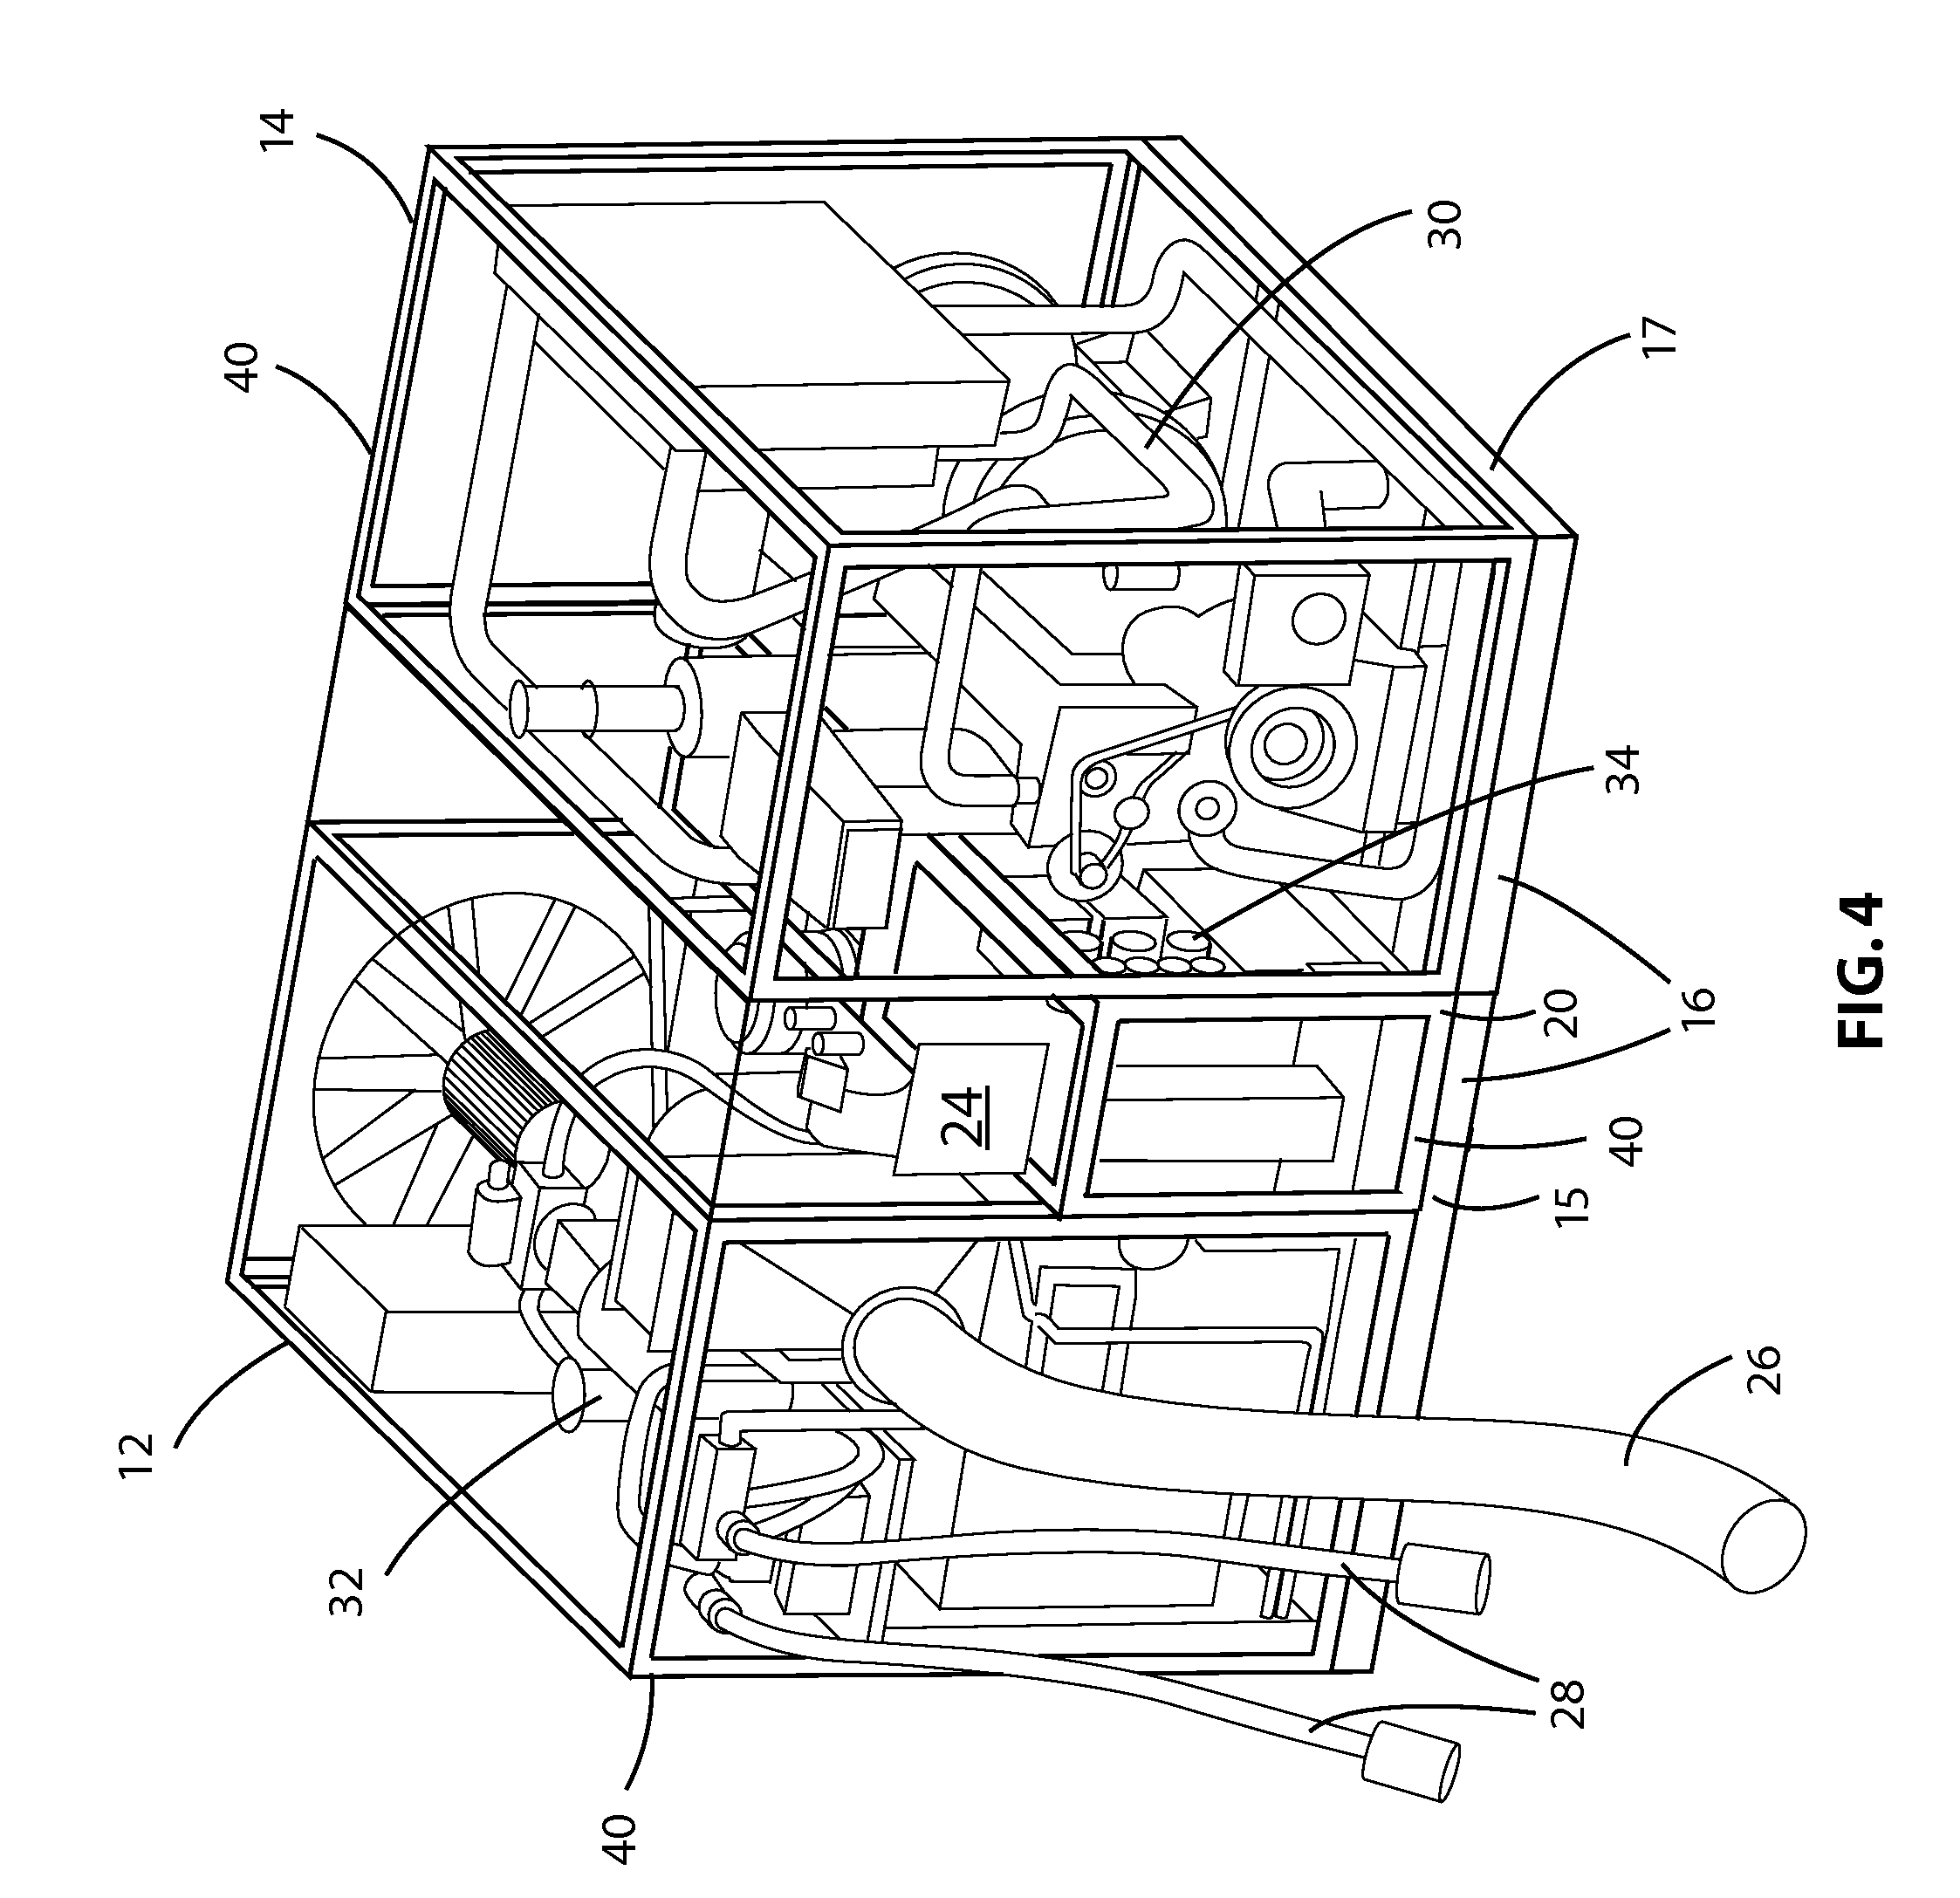 System of fasteners for attaching panels onto modules that are to be installed on an airplane ground support equipment cart